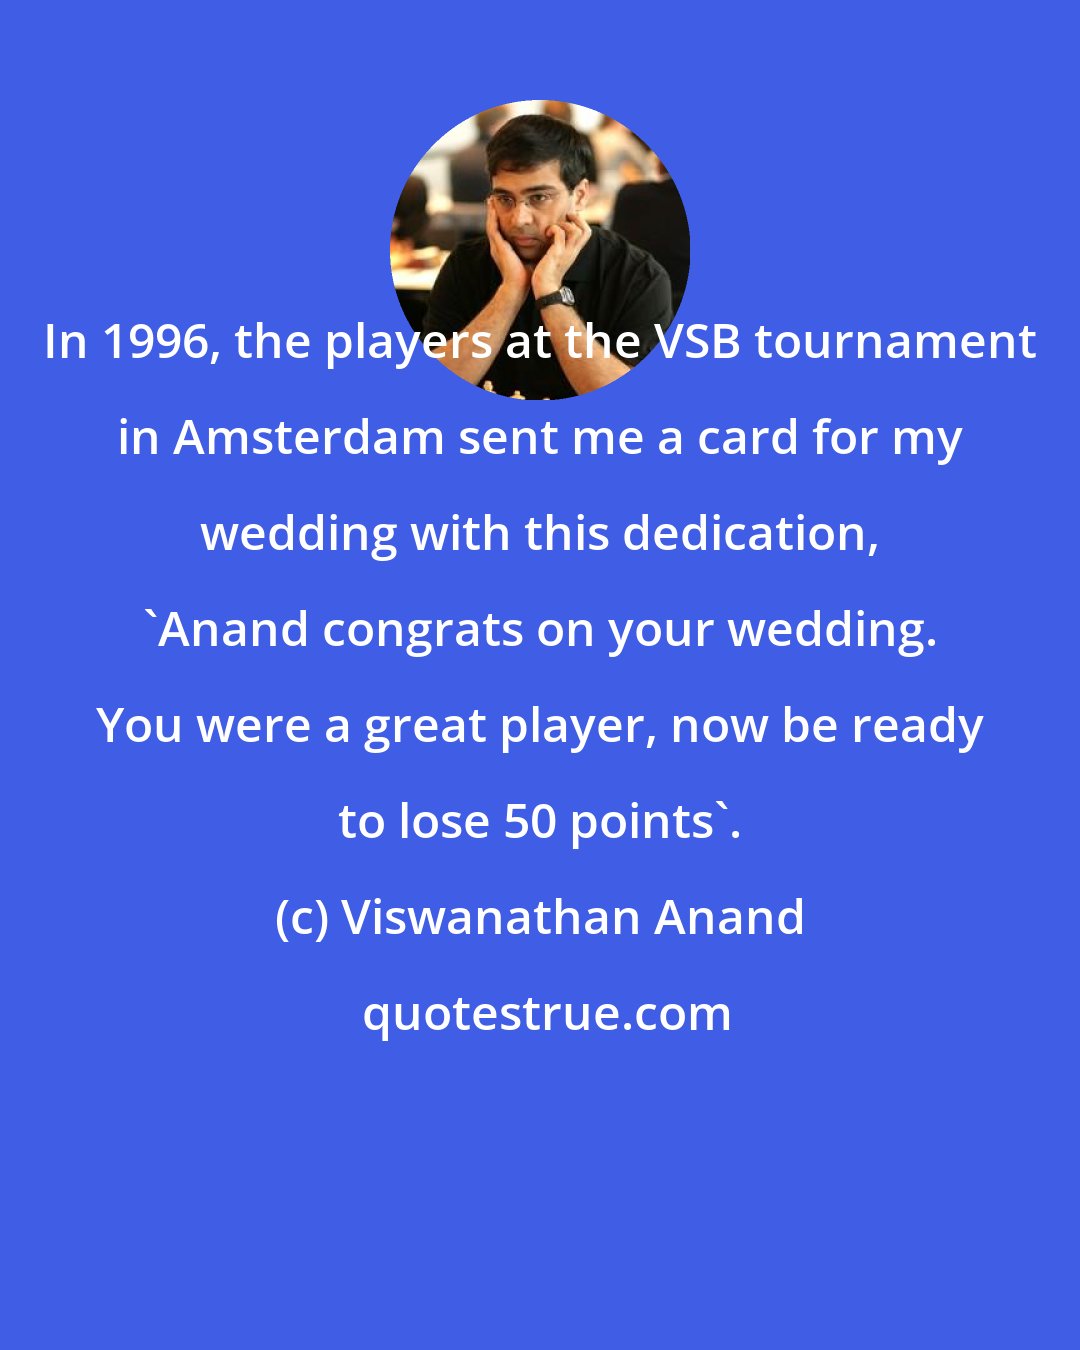 Viswanathan Anand: In 1996, the players at the VSB tournament in Amsterdam sent me a card for my wedding with this dedication, 'Anand congrats on your wedding. You were a great player, now be ready to lose 50 points'.